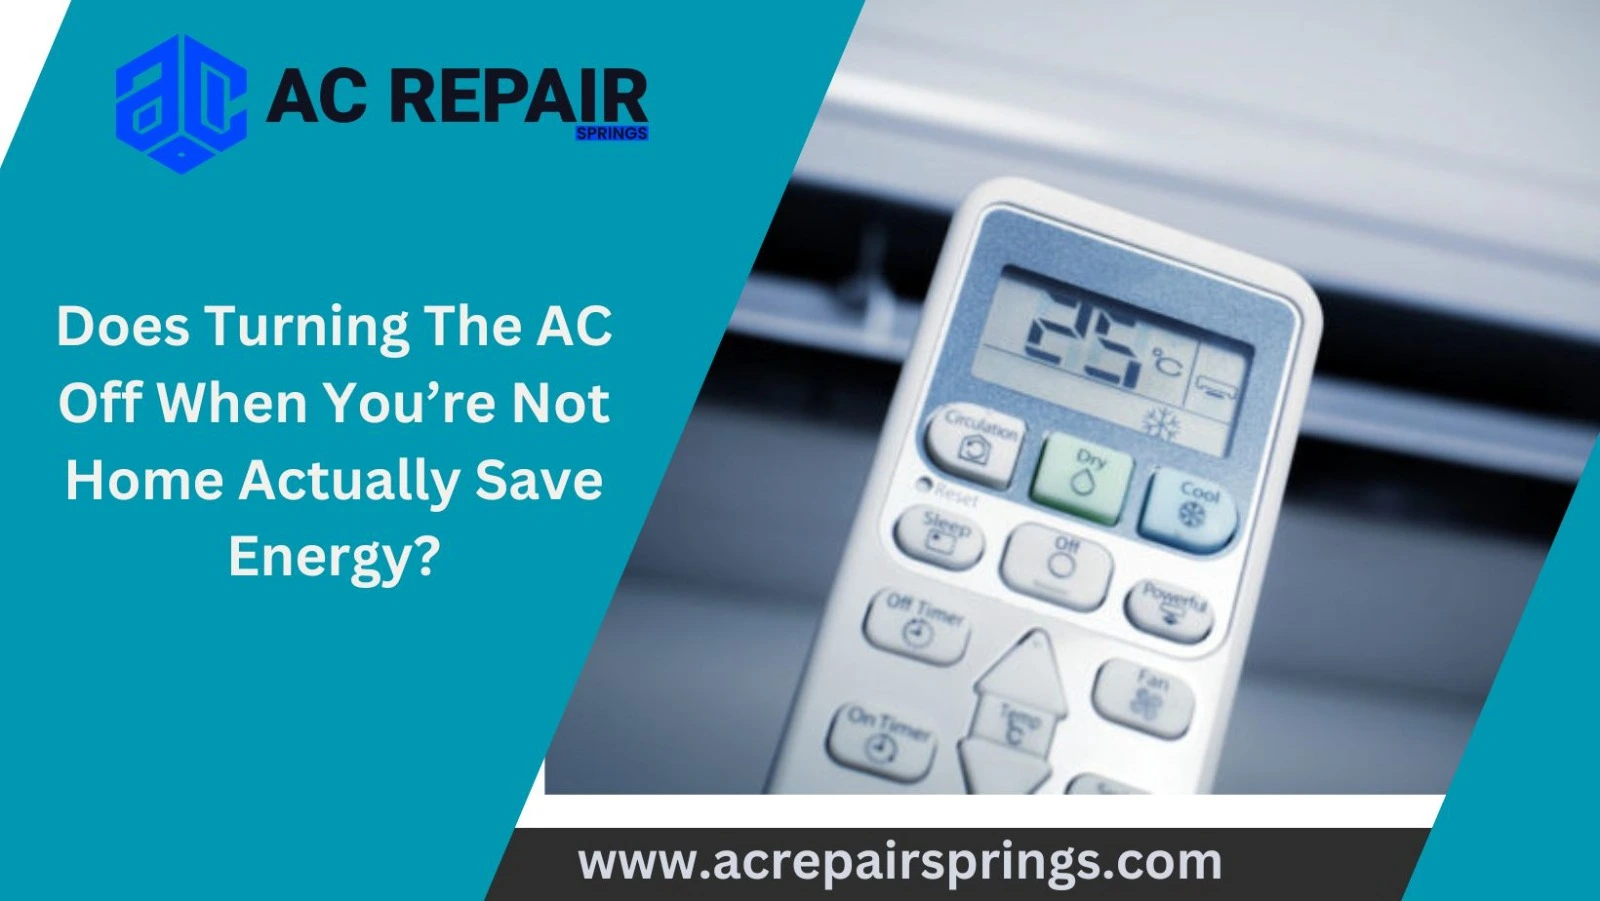 Does Turning The AC Off When You’re Not Home Actually Save Energy?